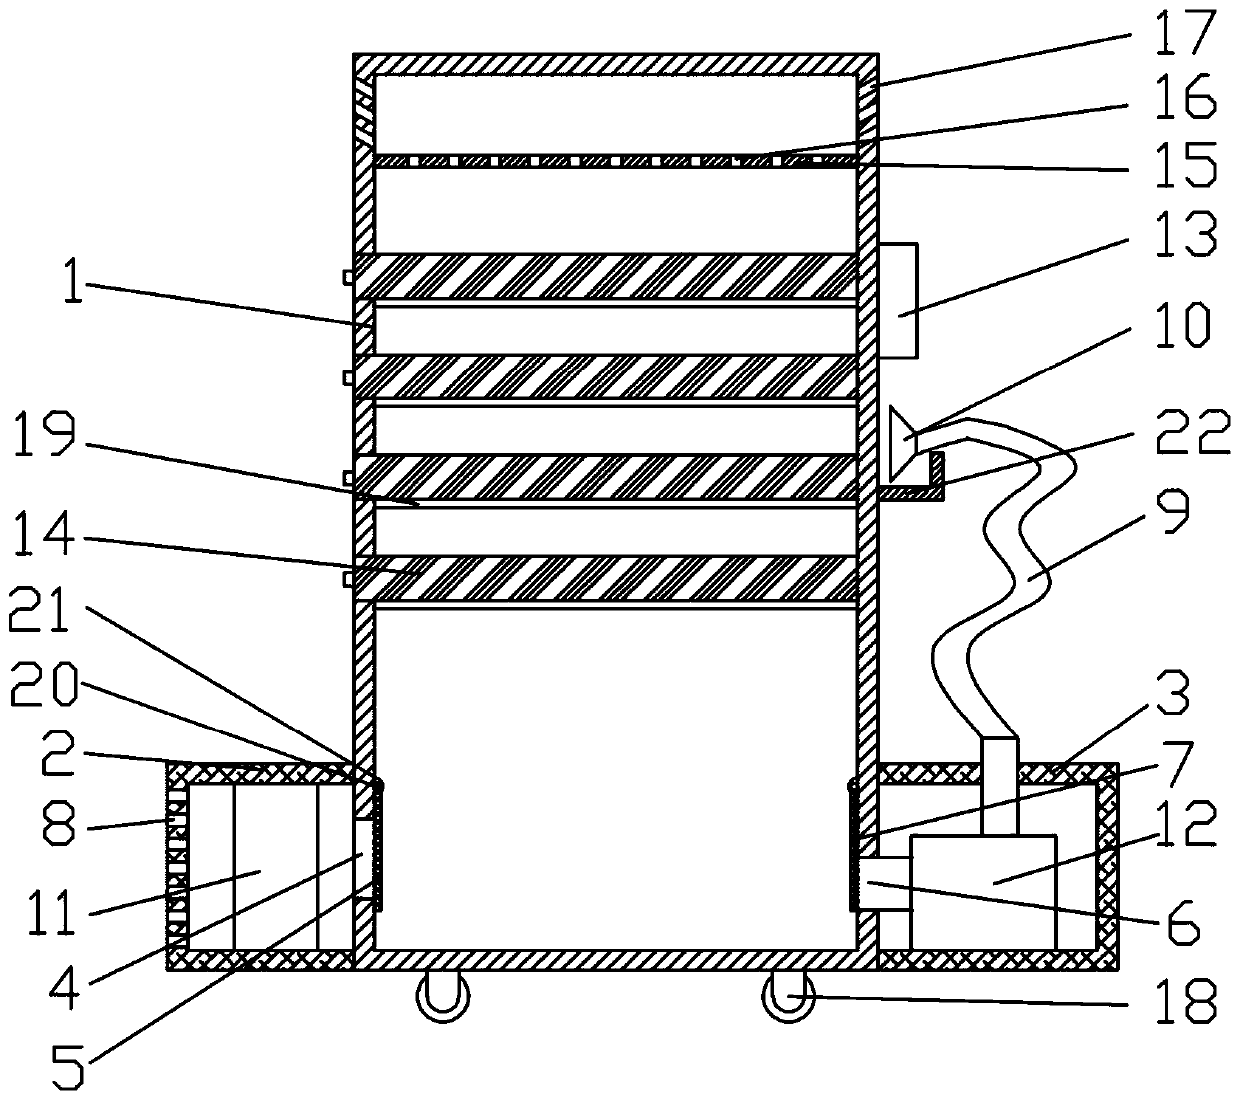 A factory purification ventilation system and its working method